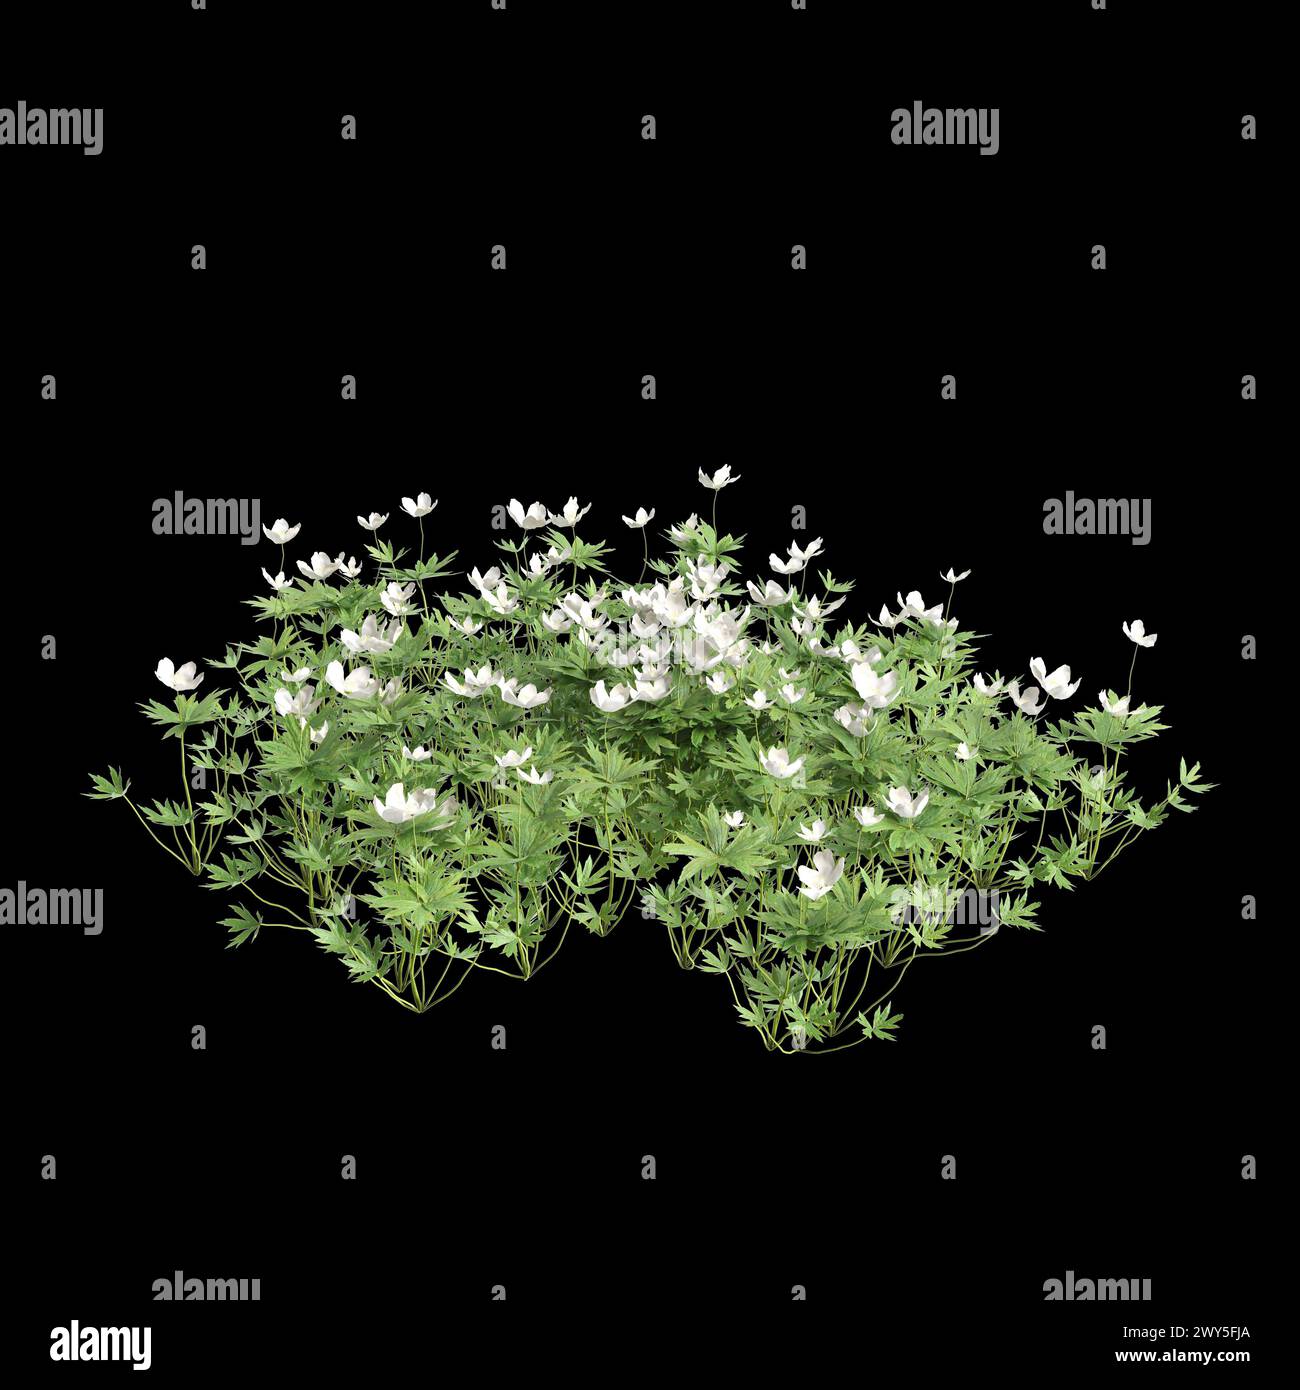 3d illustration of Anemone canadensis bush isolated on black background Stock Photo